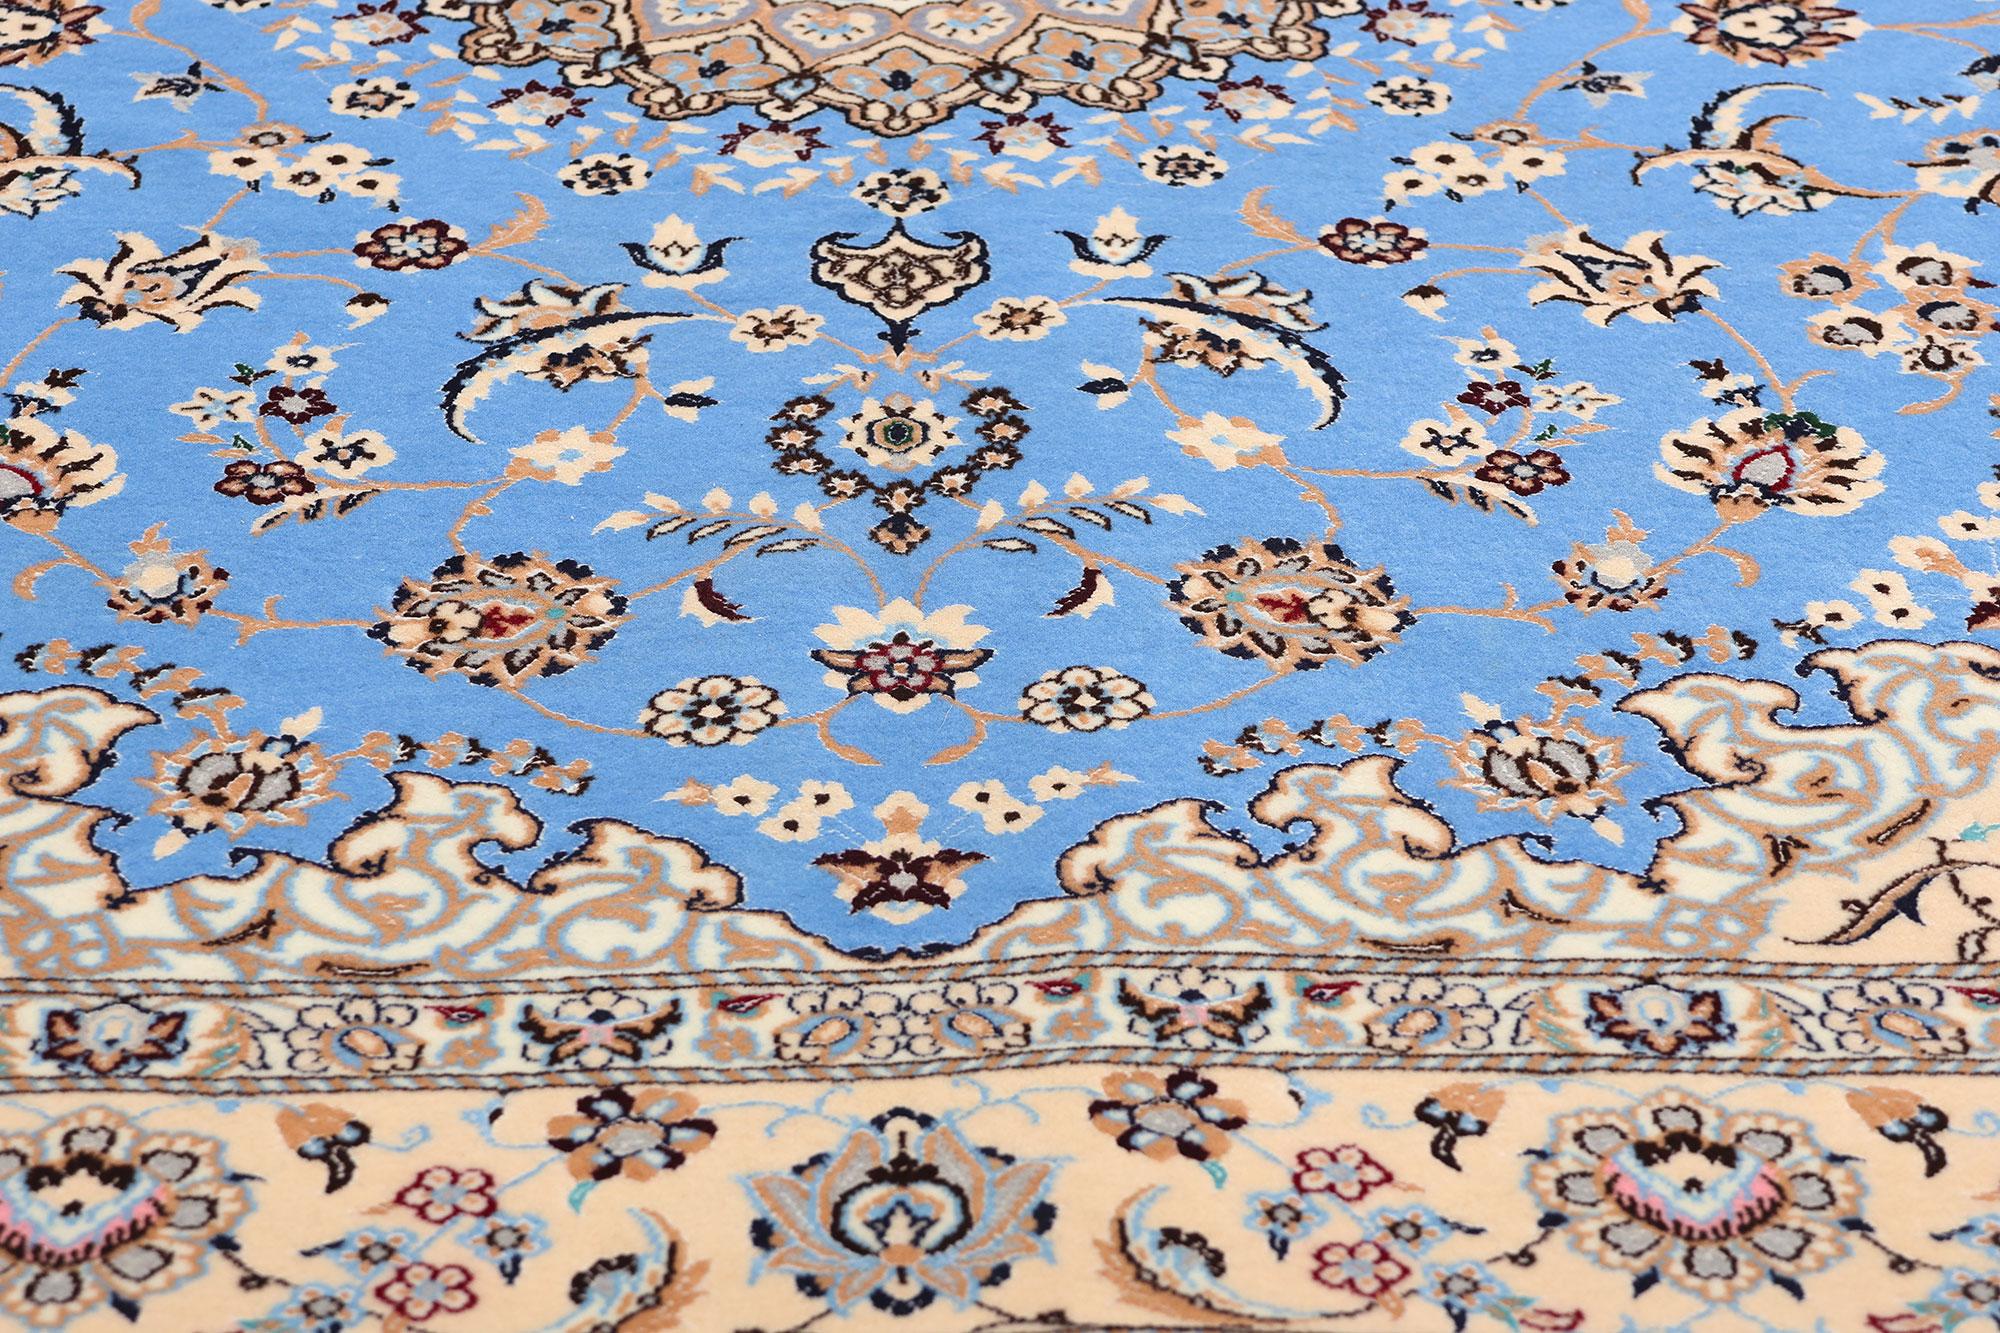 Blue Persian Nain 6La Kork Wool and Silk Rug Signed Habibian In Excellent Condition For Sale In Dallas, TX